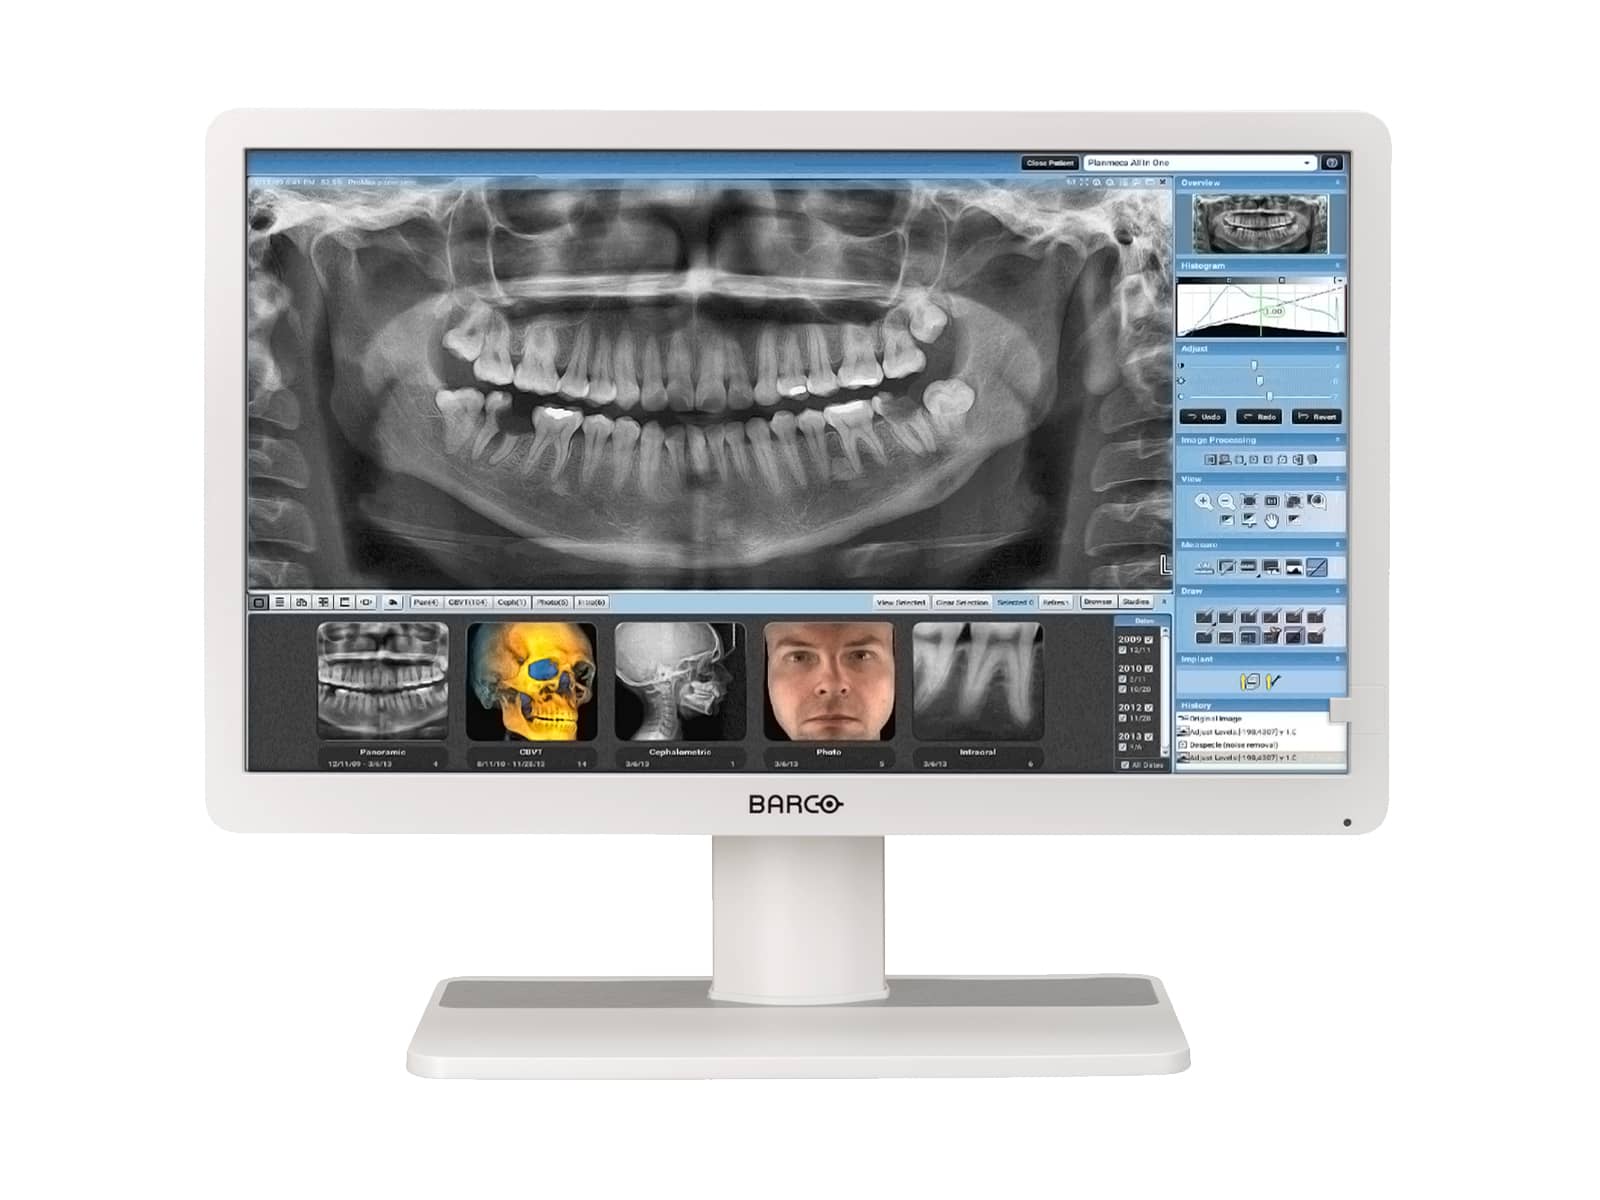 Barco Eonis MDRC-2222 (White) 2MP 22" Clinical Review LED Monitor (K9307945) Monitors.com 